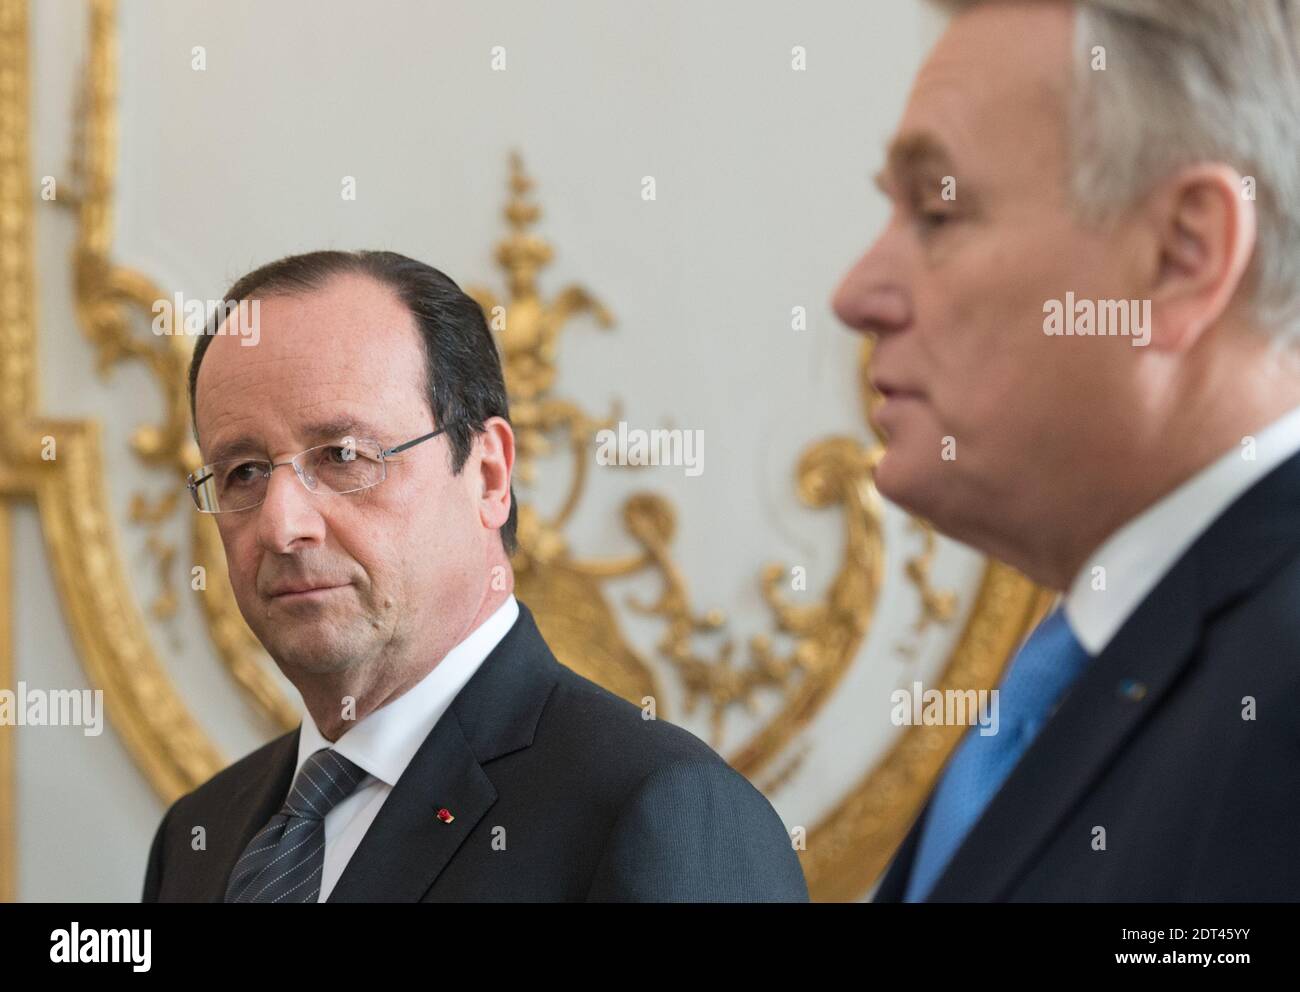 French Prime Minister Jean-Marc Ayrault delivers a speech during a new year  ceremony attended by French President Francois Hollande and members of the  government at the Elysee Palace in Paris, France on